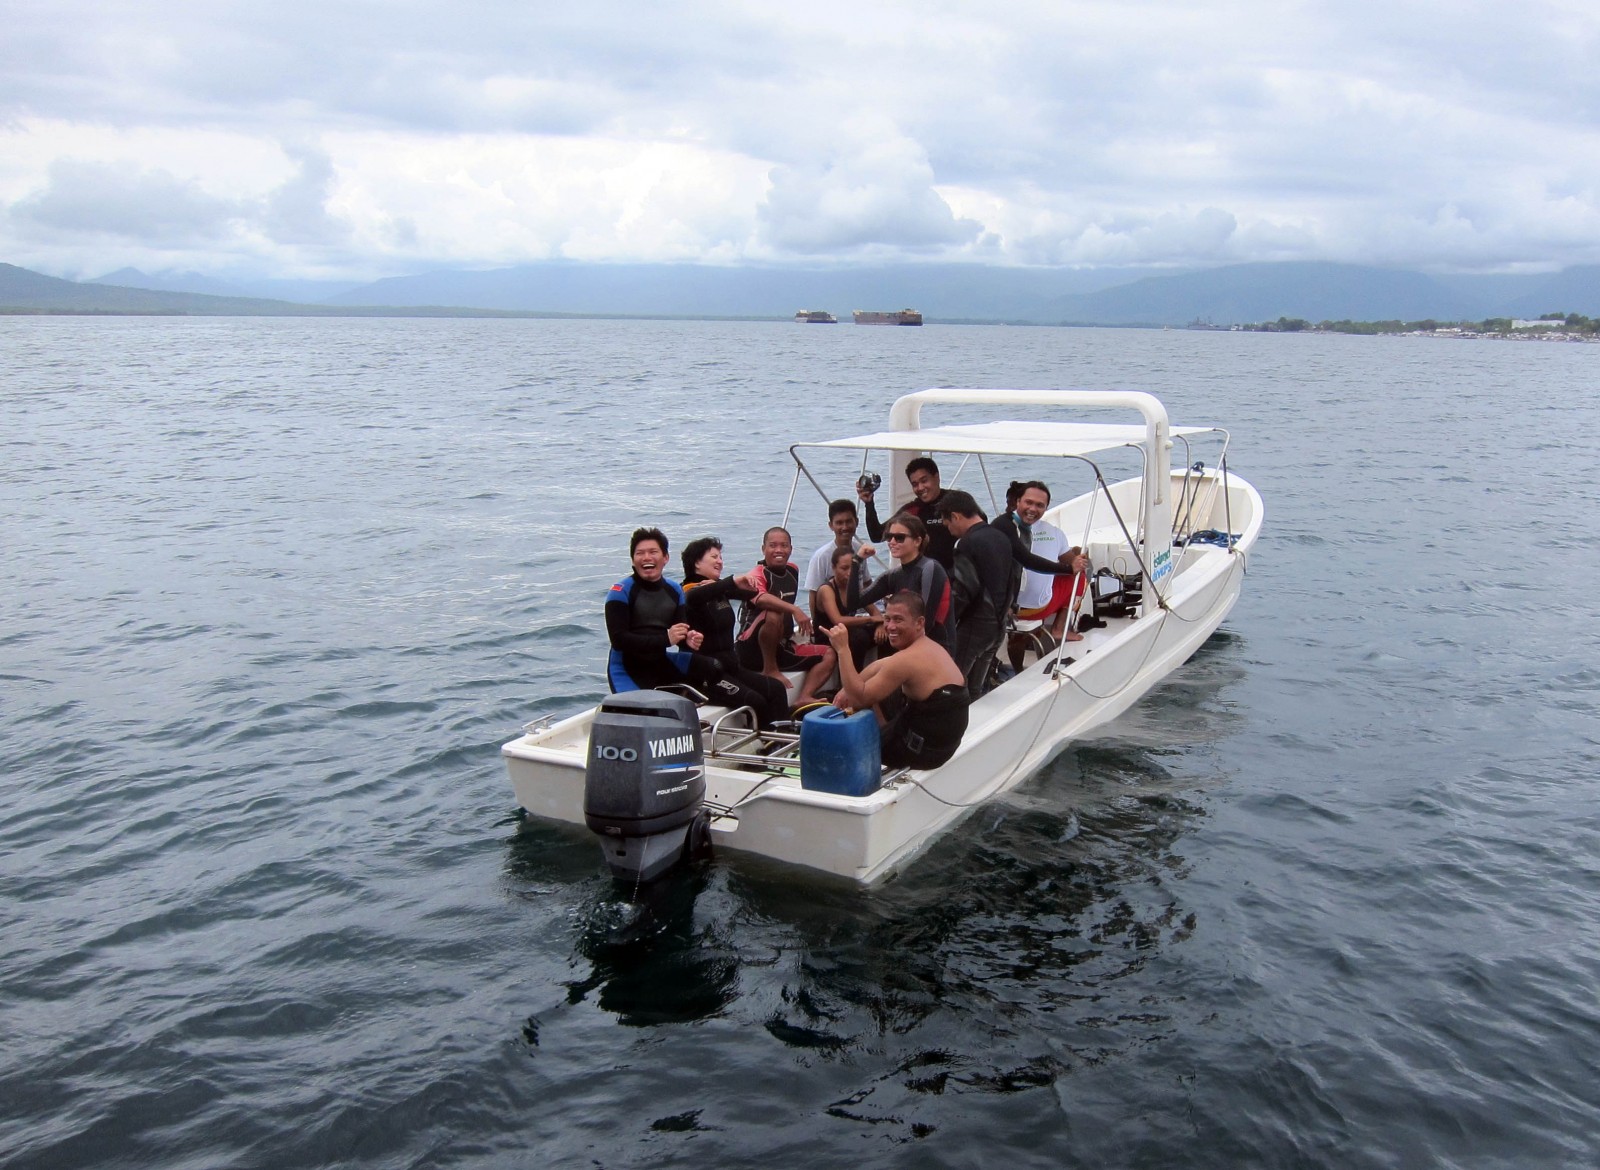 EcoDivers aboard a boat